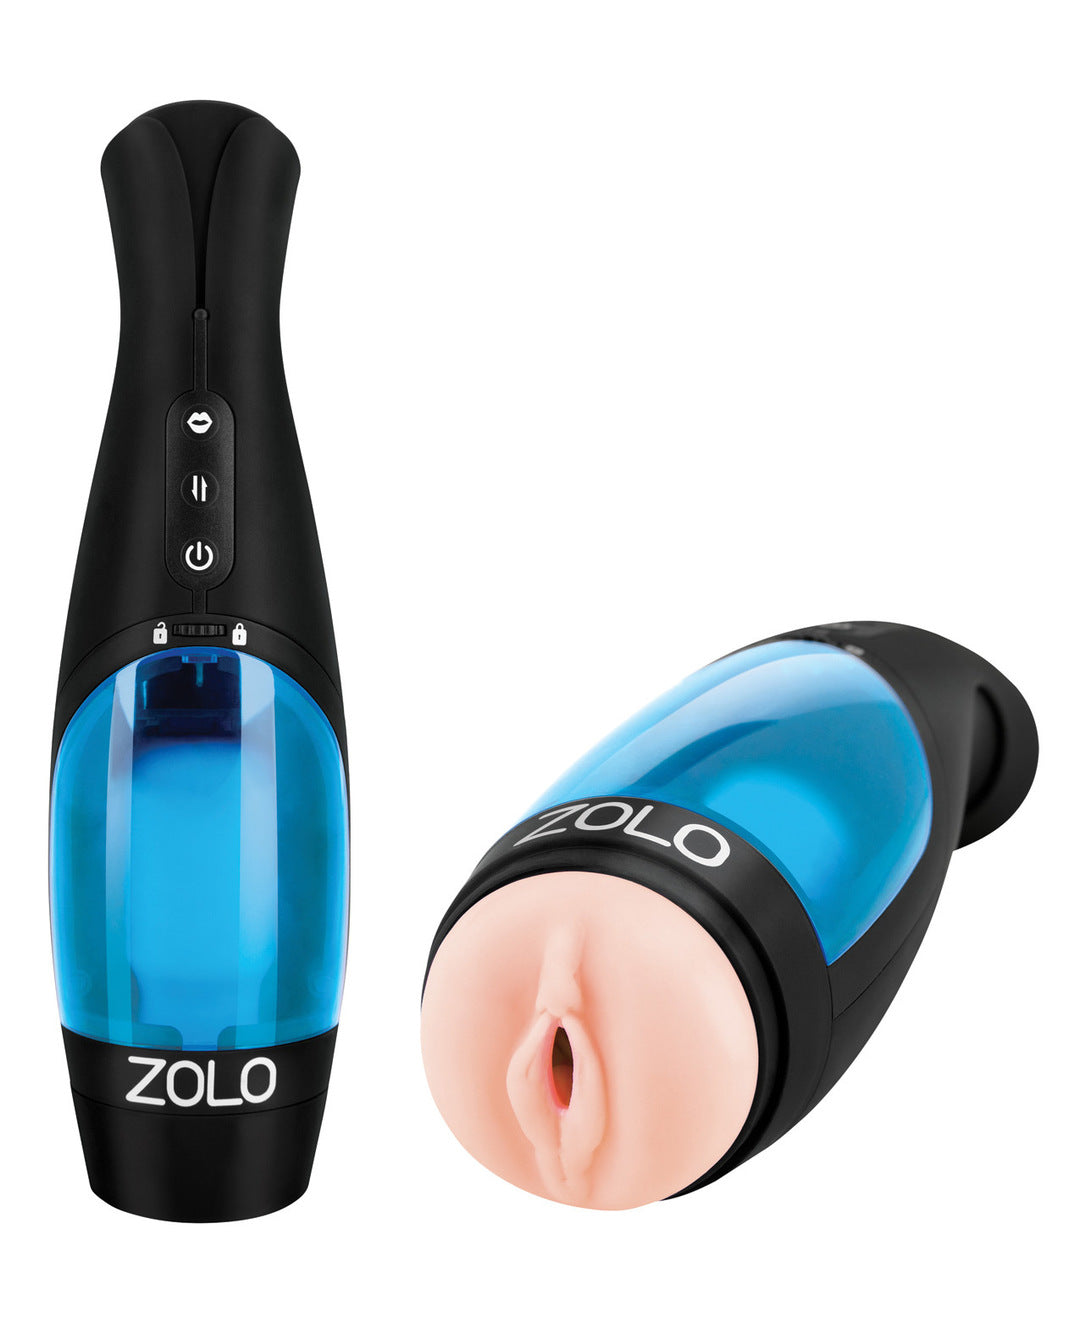 ZOLO Thrustbuster Rechargeable Vibrating Stoker